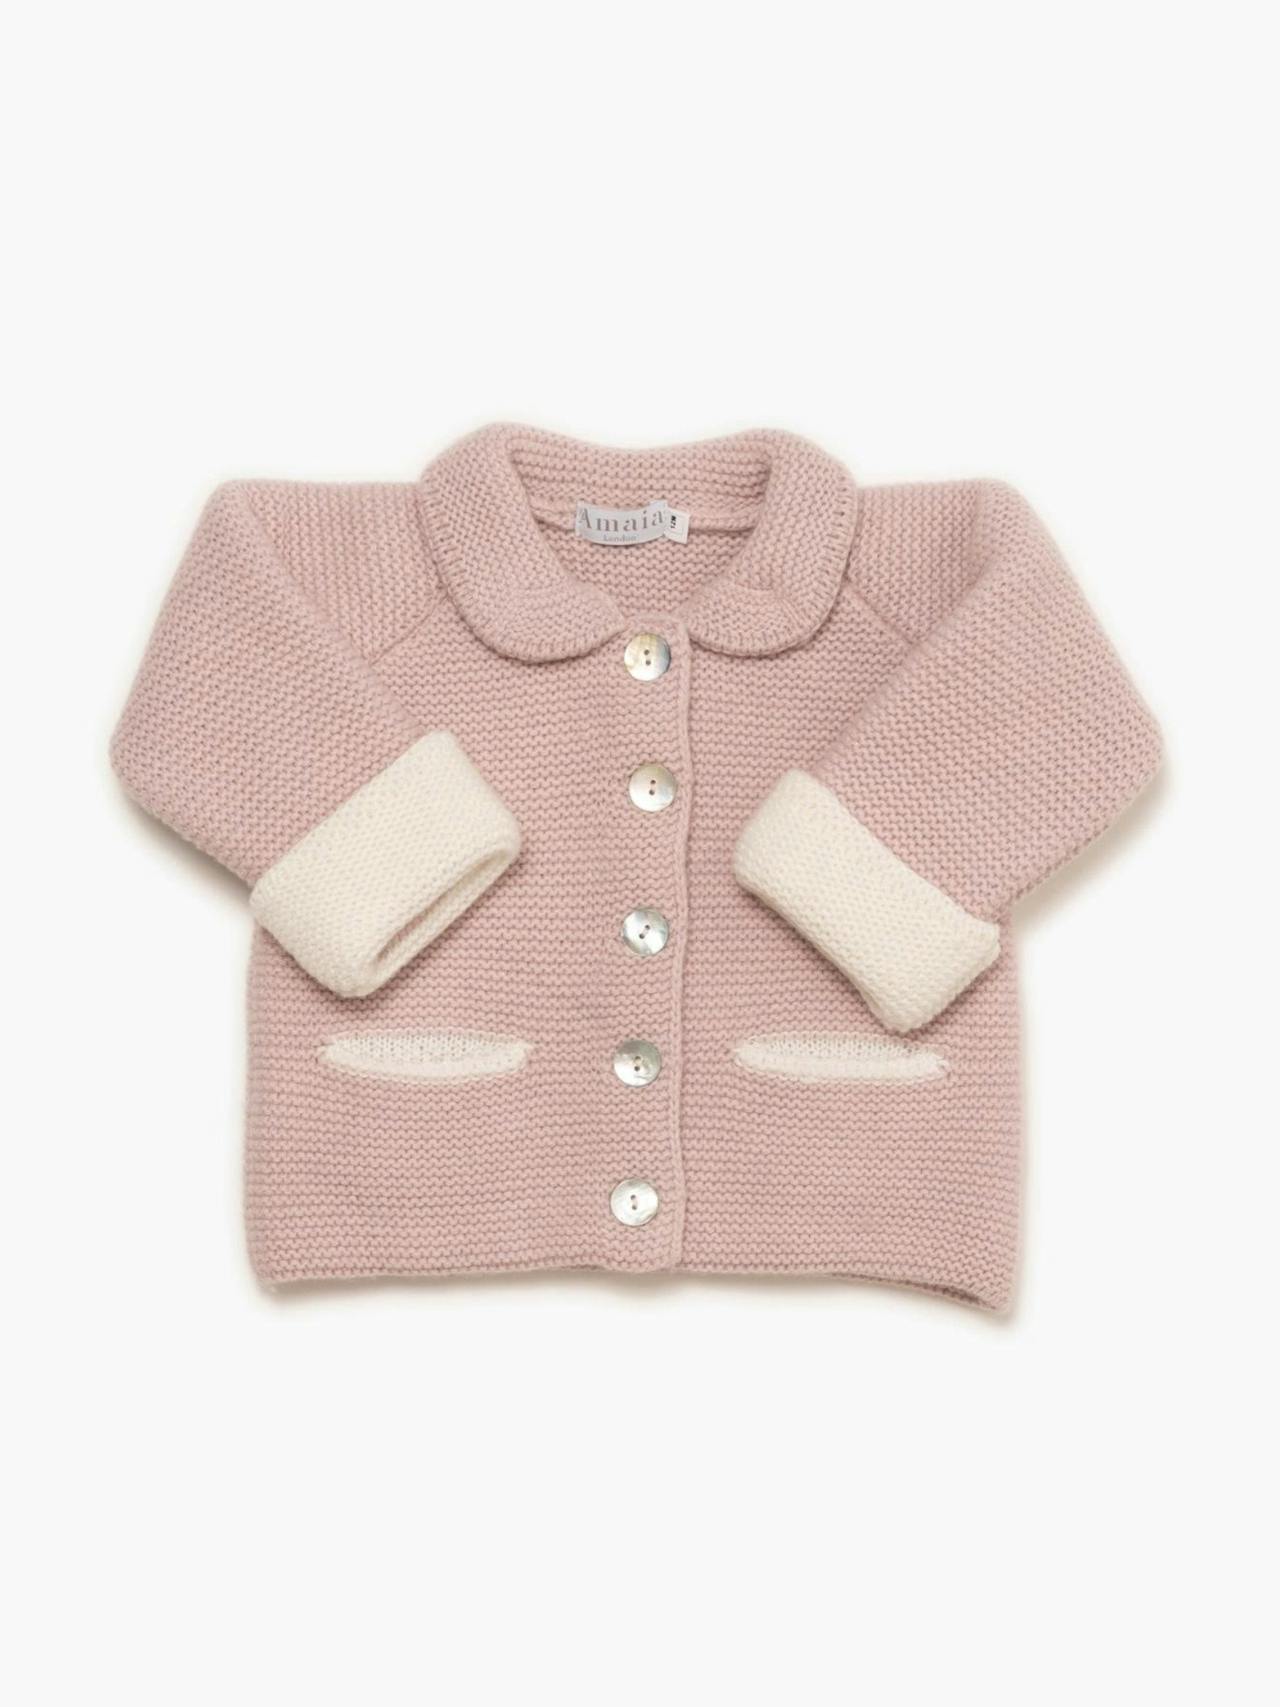 Double-layered pink knitted baby jacket